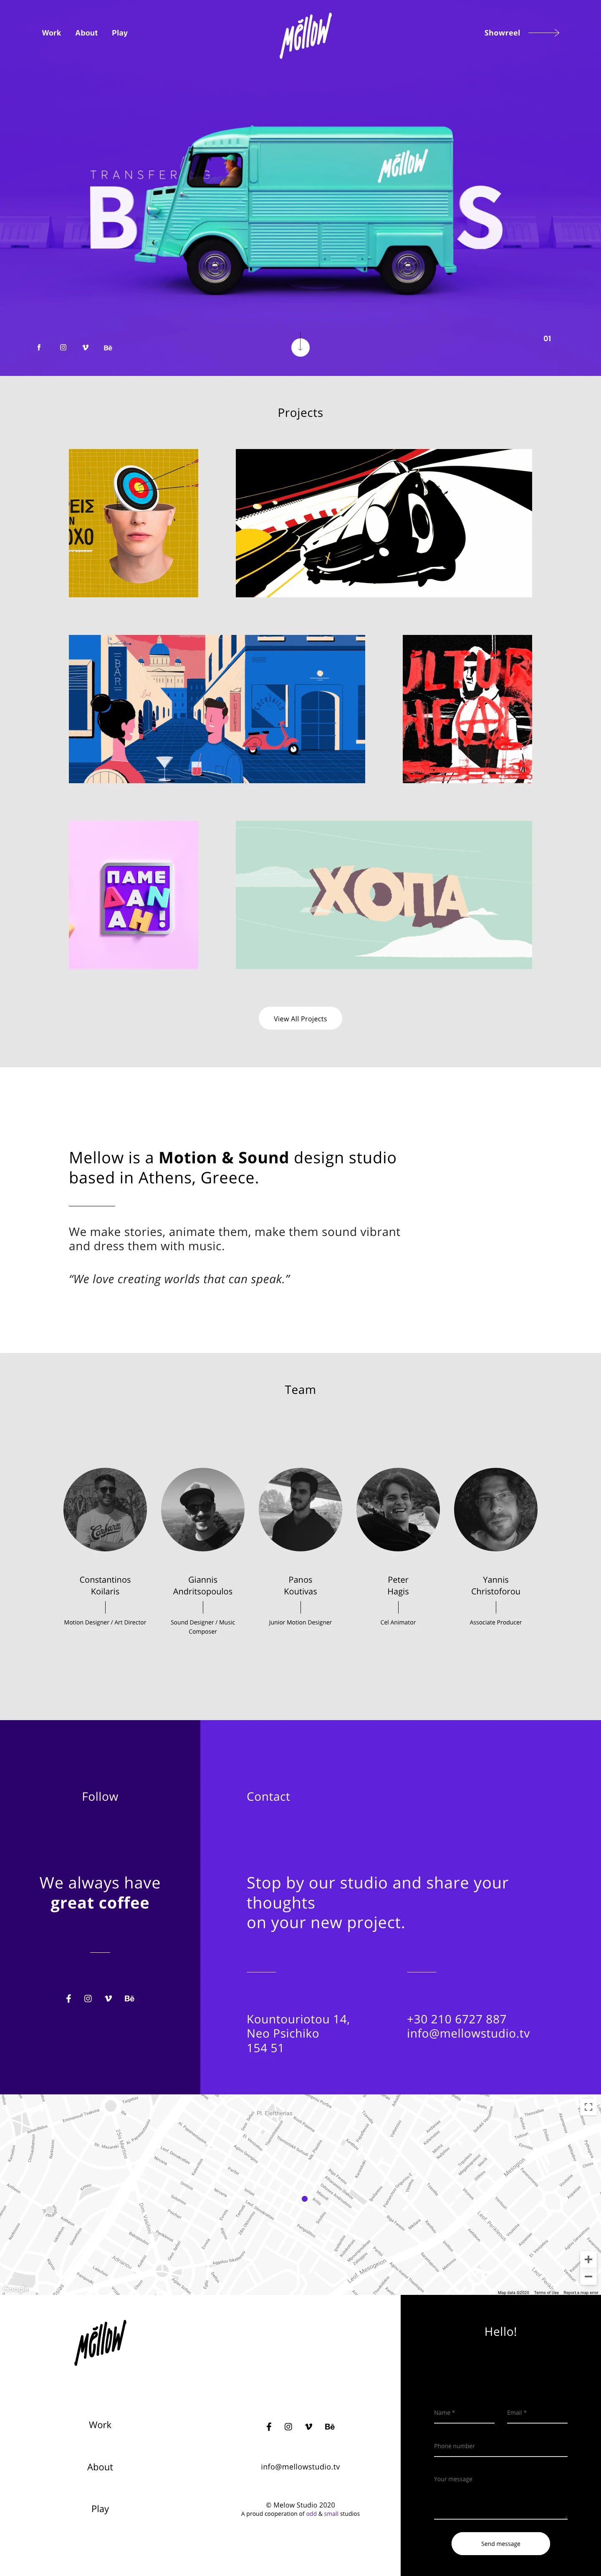 Mellow Studio Landing Page Example: Mellow is a Motion & Sound design studio based in Athens, Greece. We make stories, animate them, make them sound vibrant and dress them with music.